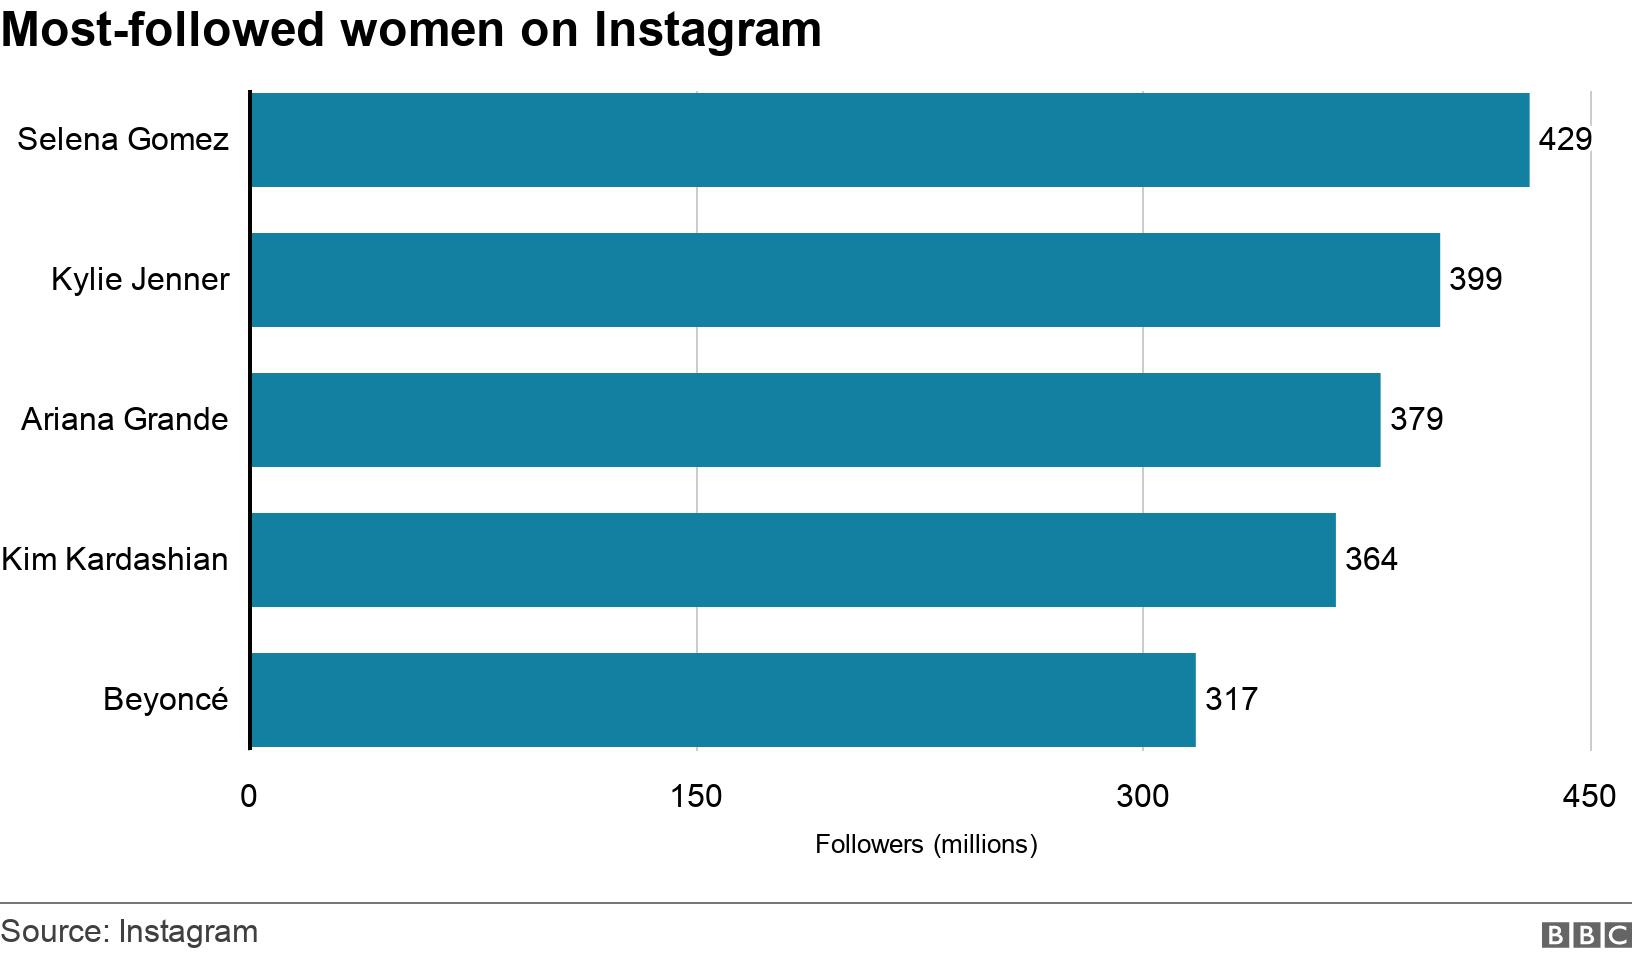 Most-followed women on Instagram . . A bar chart showing the most followed women on Instagram. First is Selena Gomez with 429 million followers, next is Kylie Jenner with 399 million, followed by Ariana Grande with 379 million. Kim Kardashian is next with 364 million and Beyonce is fifth with 317 million. .